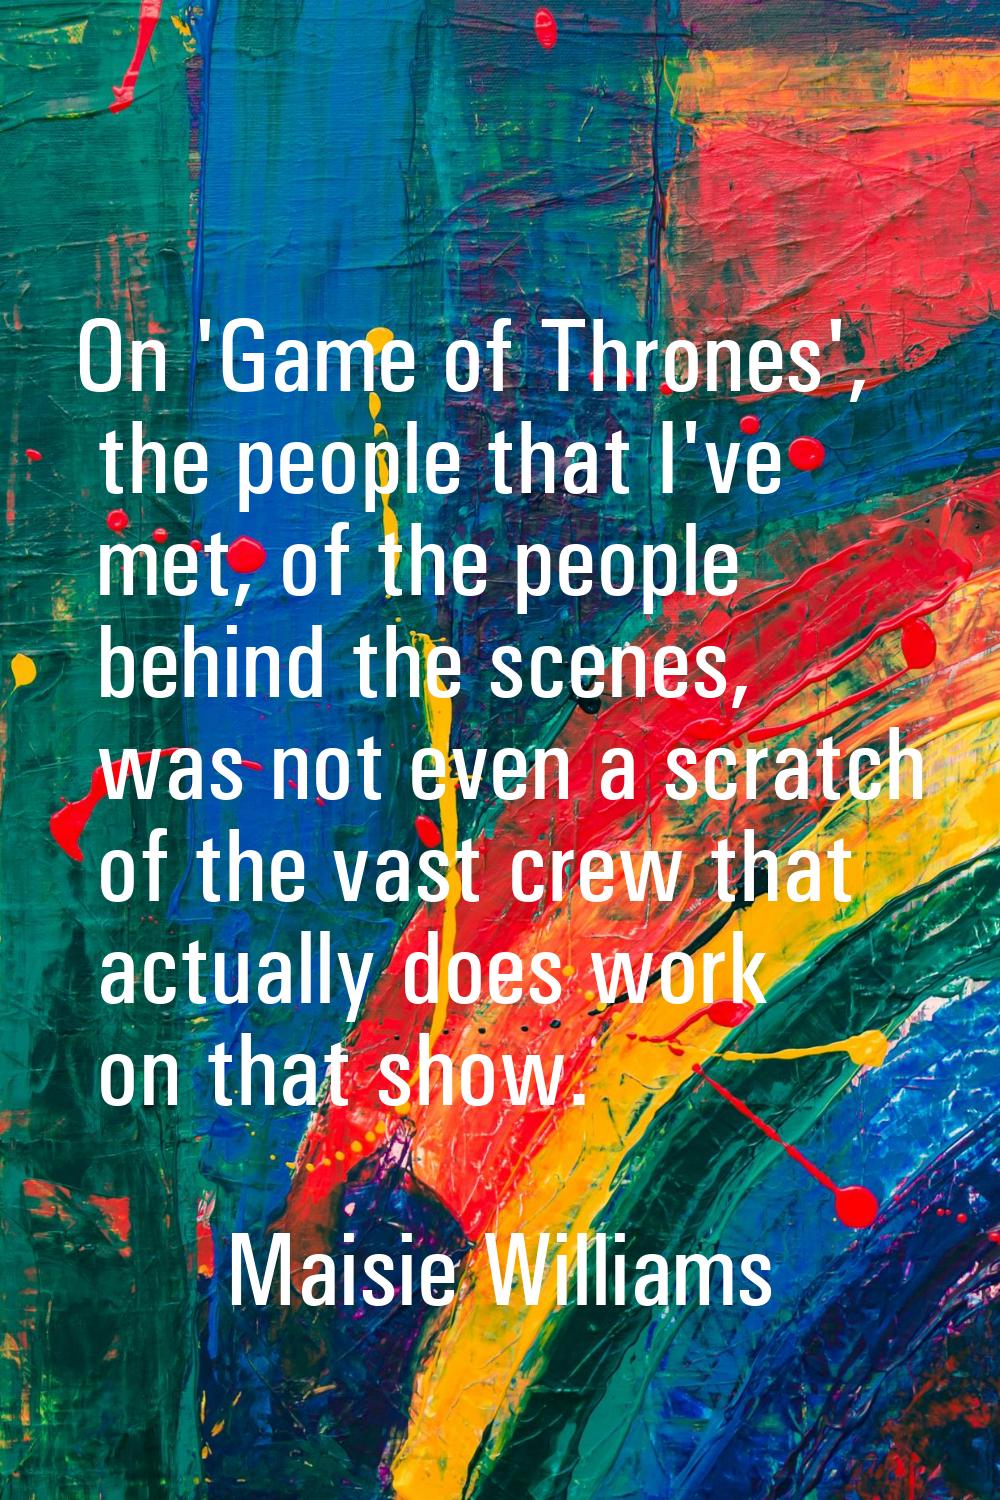 On 'Game of Thrones', the people that I've met, of the people behind the scenes, was not even a scr